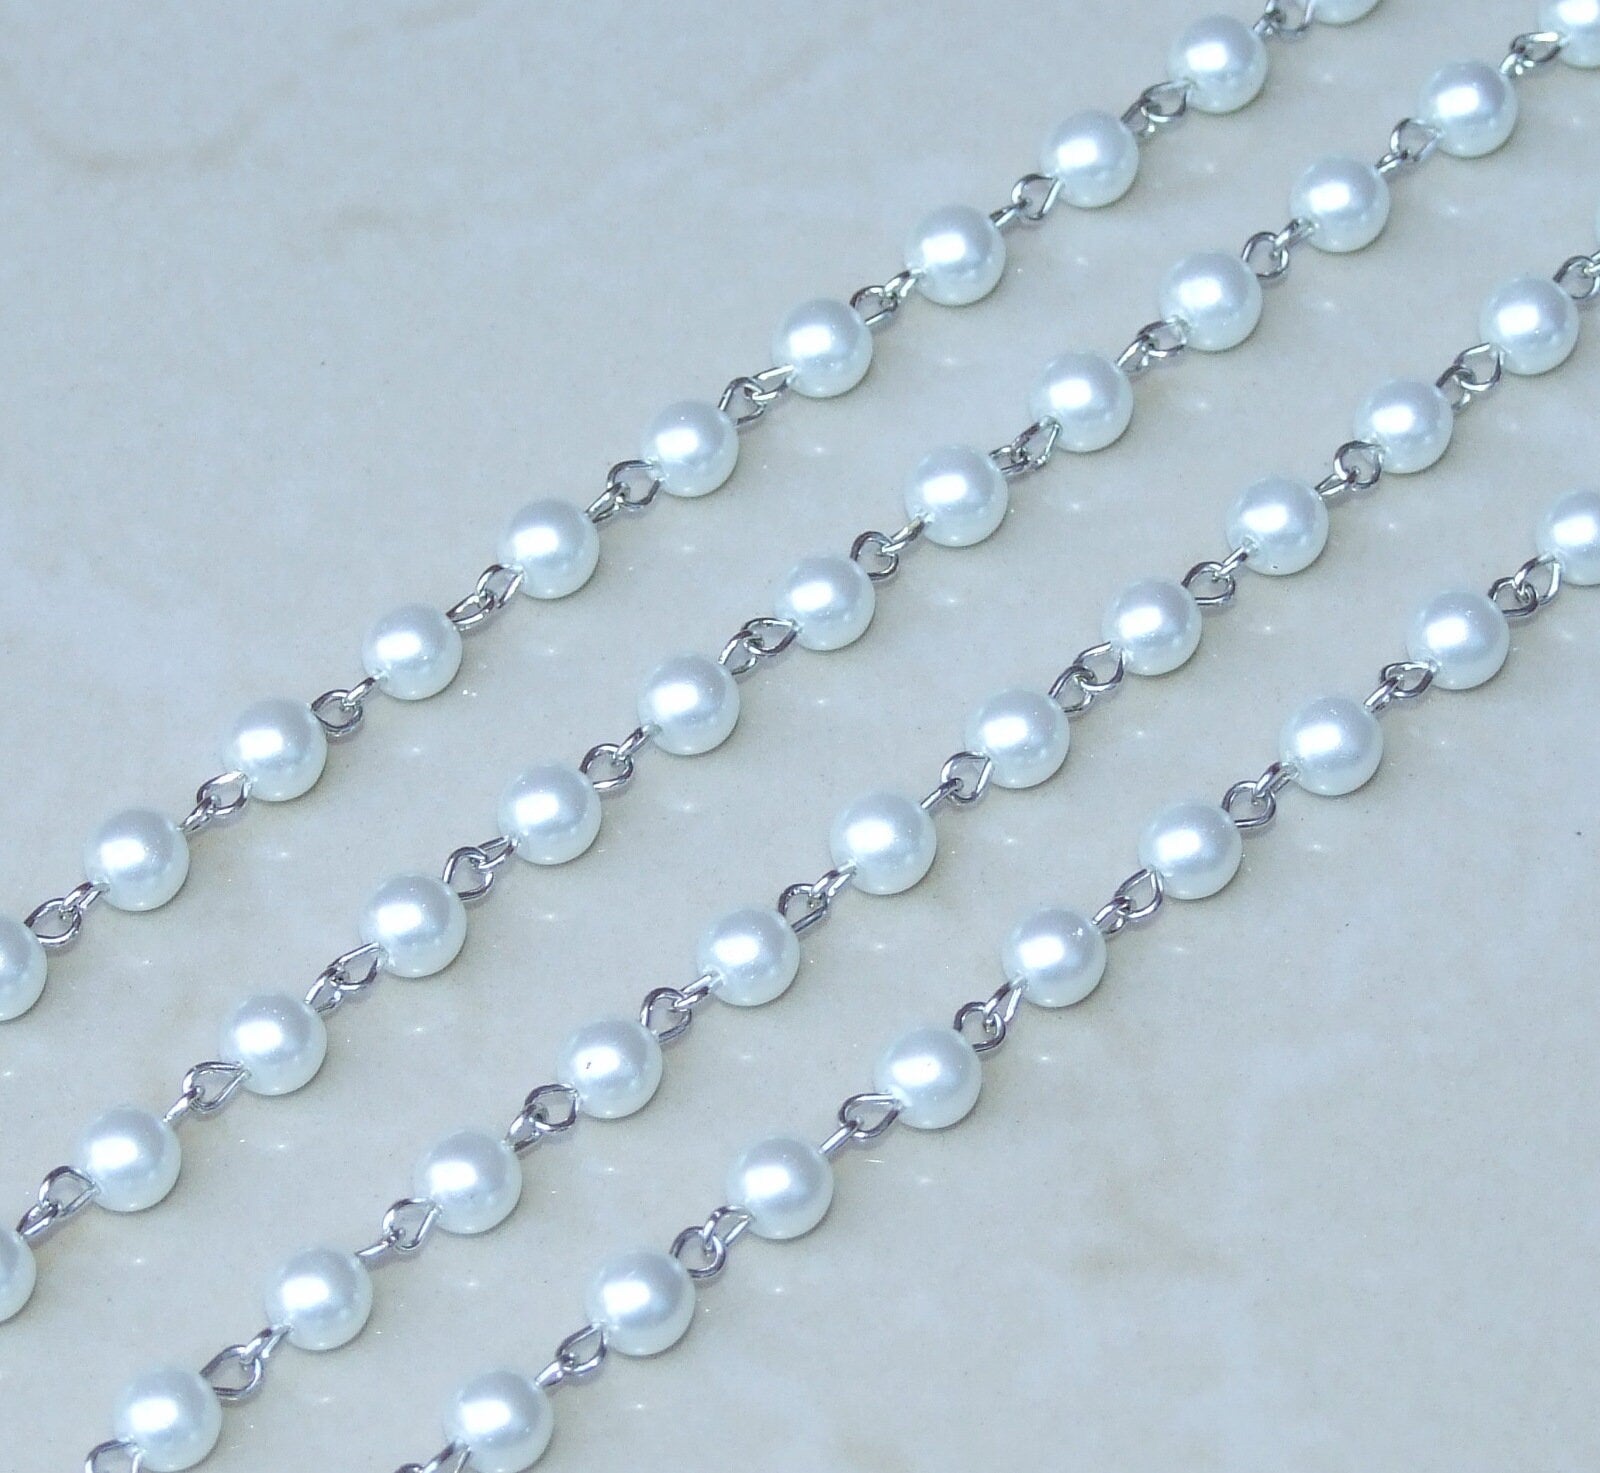 White Pearl Rosary Chain, Bulk Chain, 1 Meter, Glass Beads, Beaded Chain, Body Chain Jewelry, Silver Chain, Necklace Chain, Belly Chain, 6mm